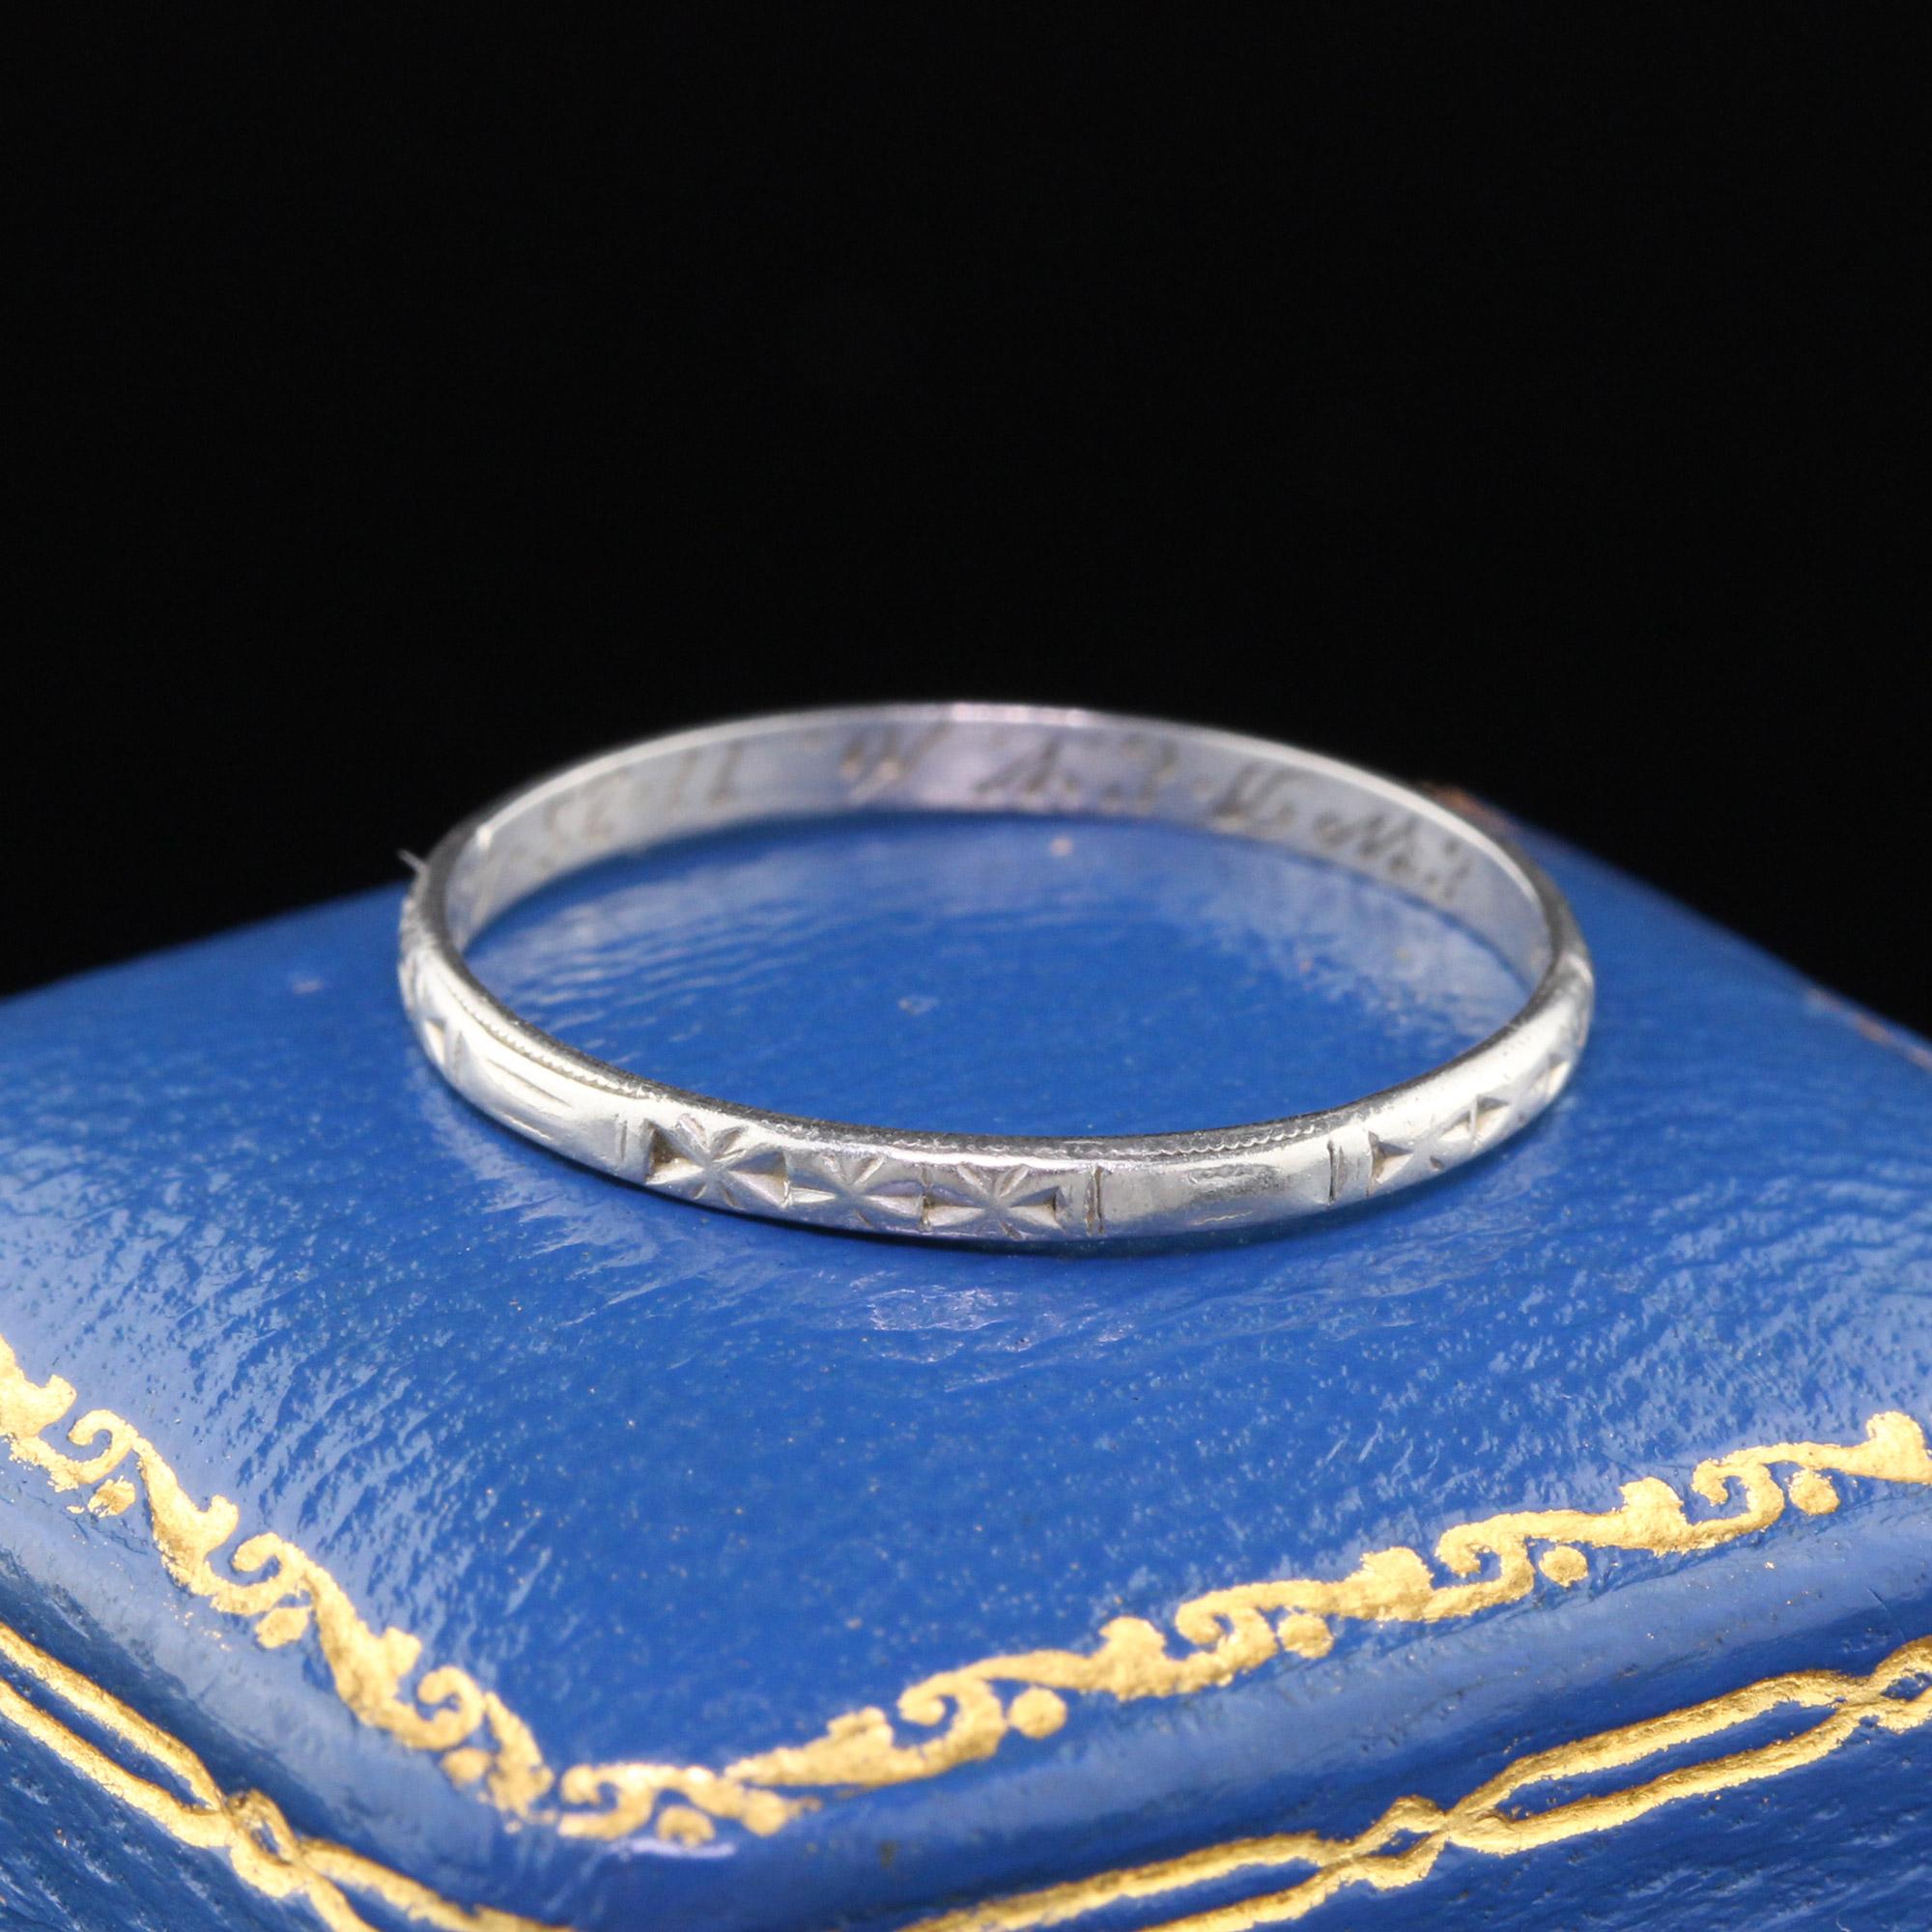 Circa 1943 - Vintage platinum wedding band with engravings all the way around.

#R0217

Metal: Platinum

Weight: 1.6 Grams

Ring Size: 8

*Unfortunately this ring cannot be sized

Measurements: 1.85 mm wide

Measurement from finger to top of ring: